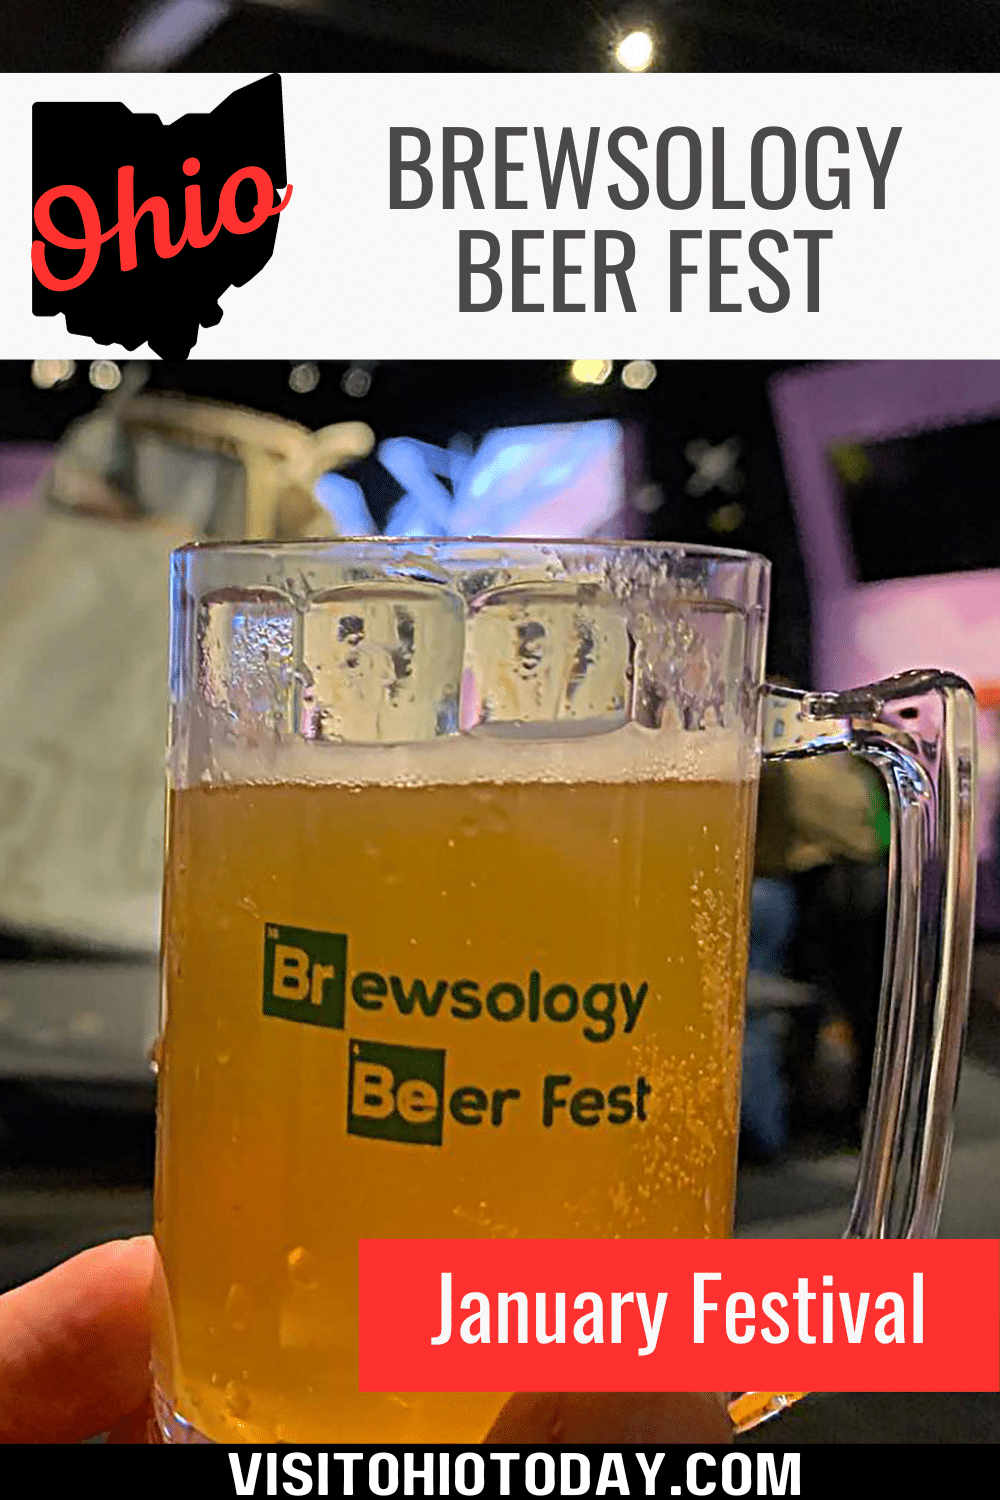 The Brewsology Beer Fest is held mid-January, from 7pm to 11pm. The event is an after-hours event that gives attendees access to the Great Lakes Science Center as well as an opportunity to try a variety of craft beers and ciders.